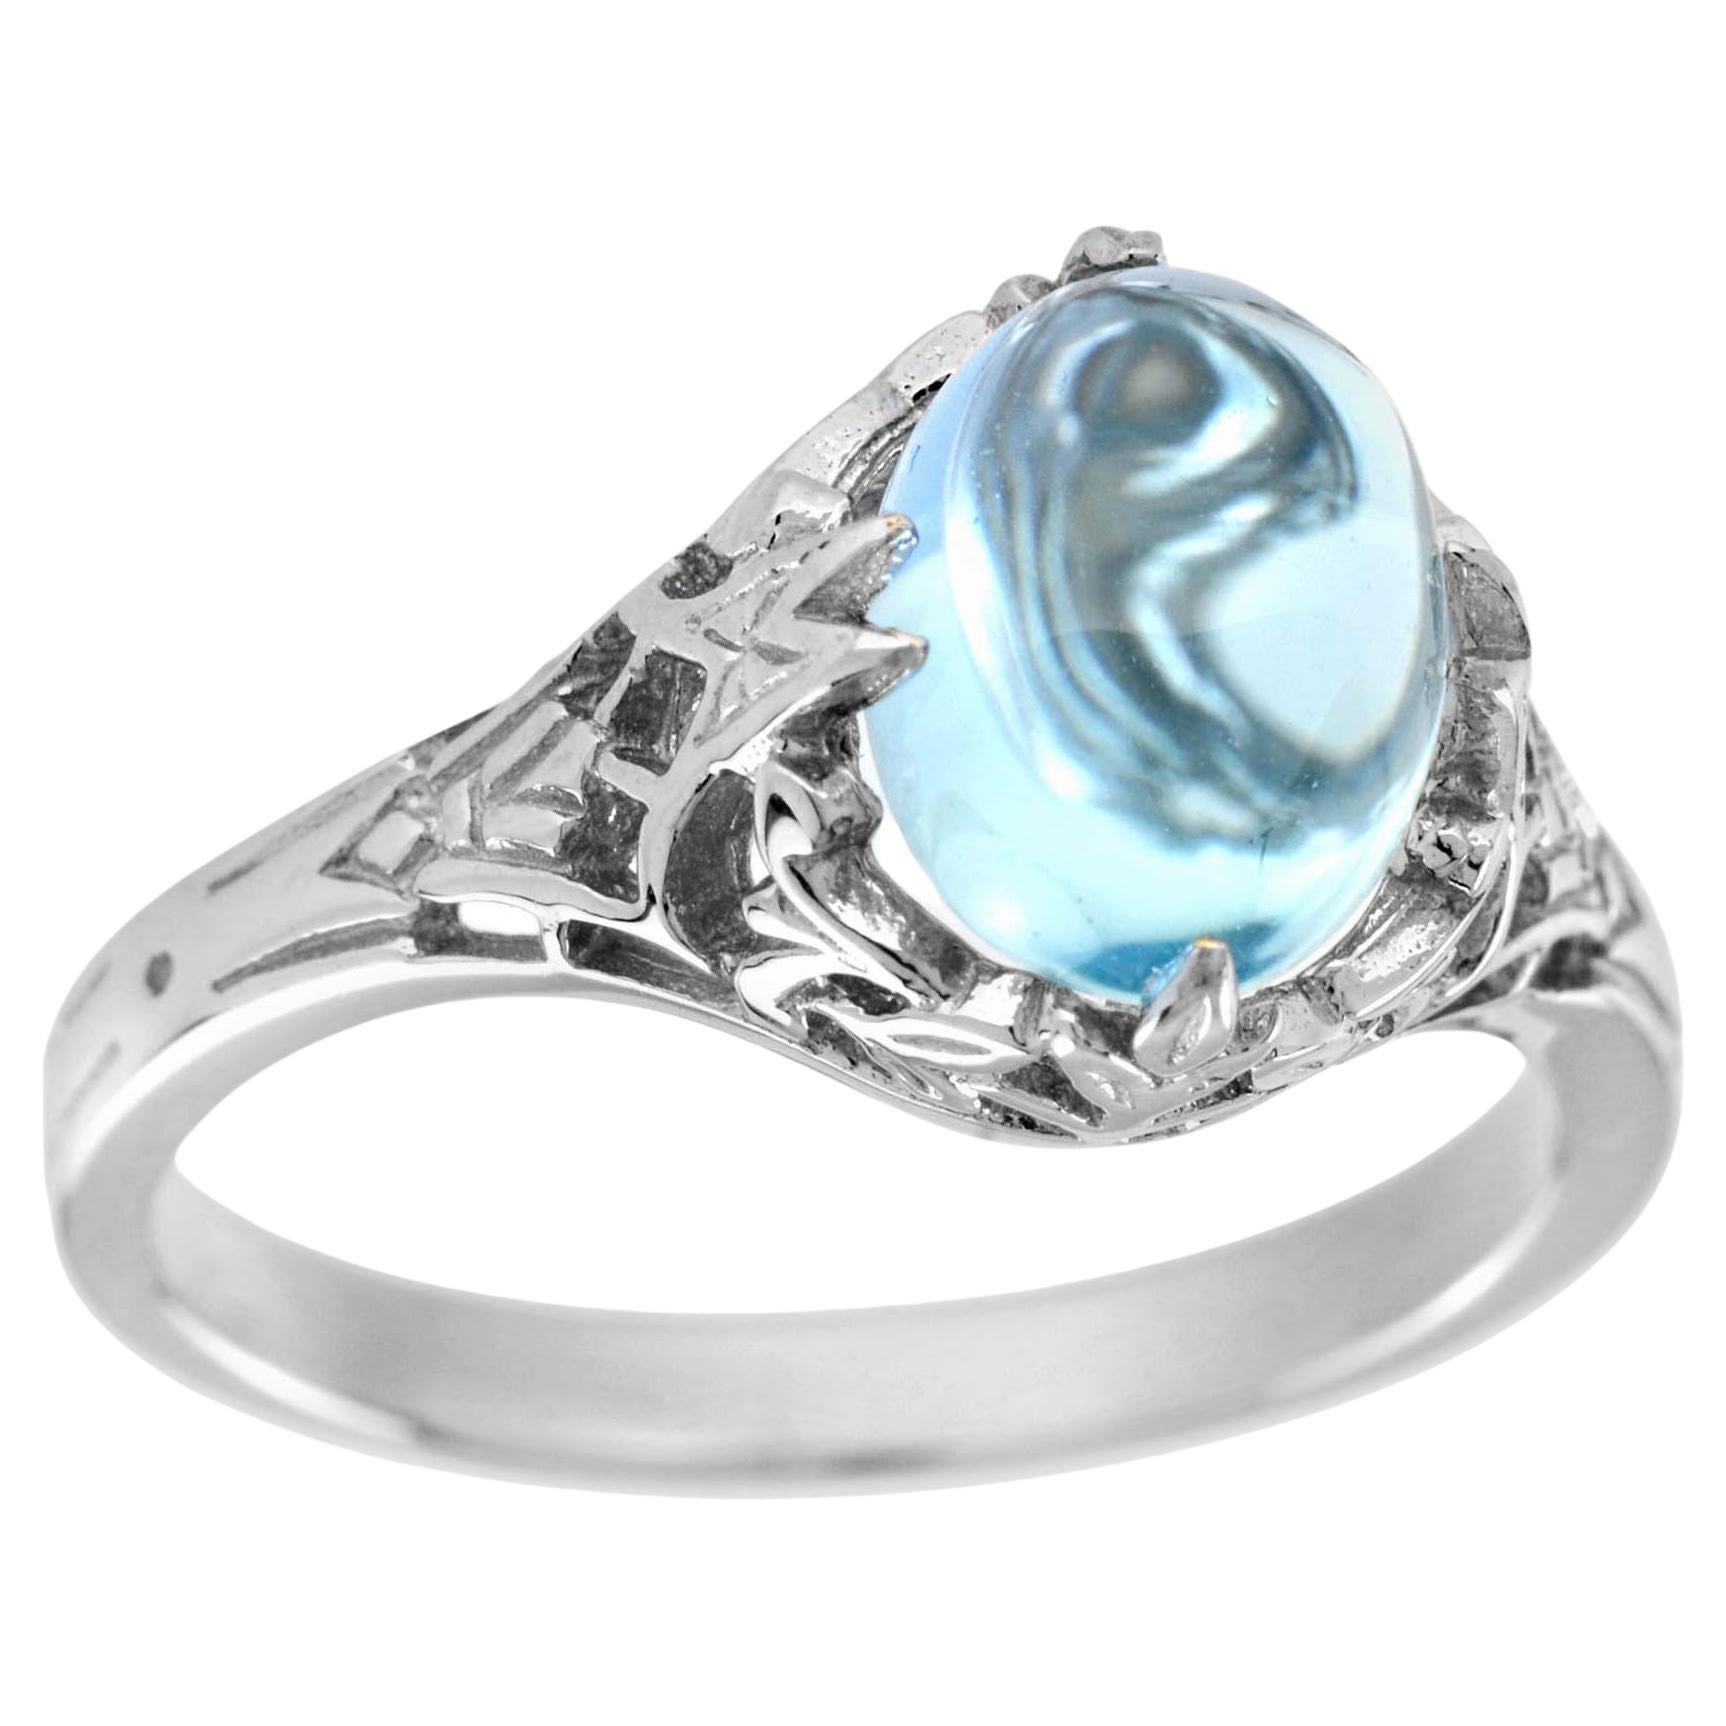 For Sale:  Natural Cabochon Blue Topaz Vintage Style Filigree Ring in Solid 9K White Gold